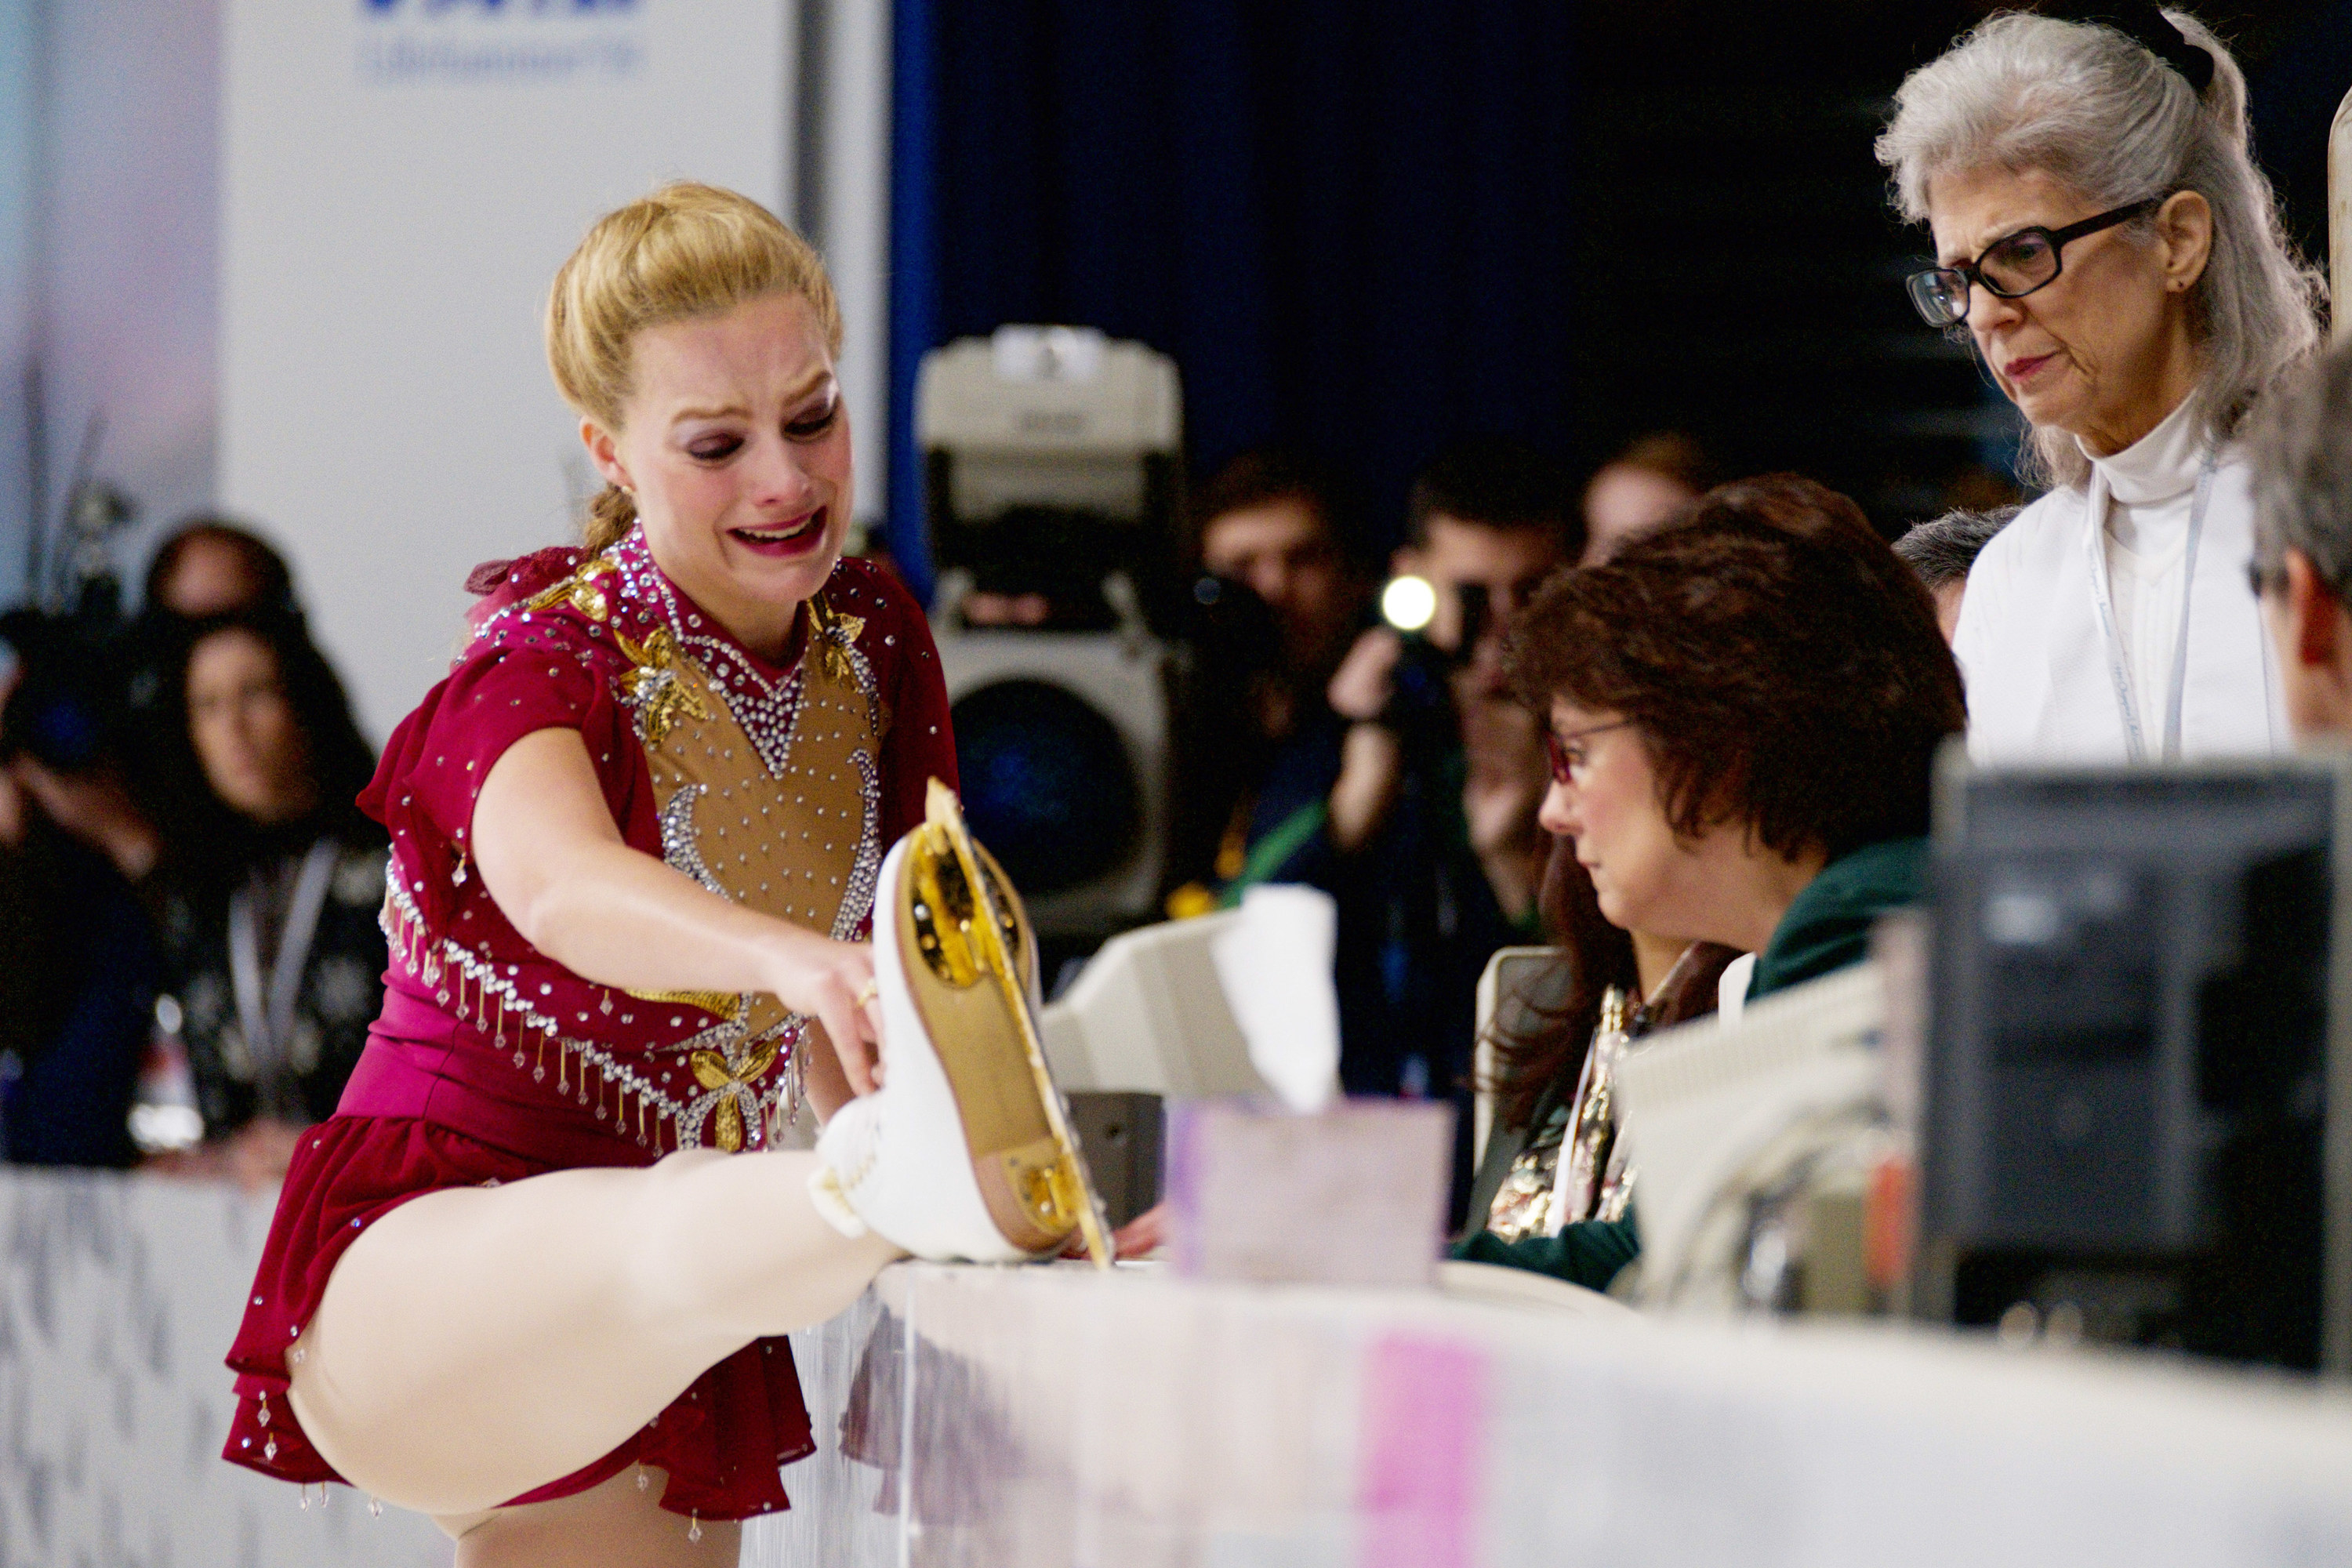 Robbie, as Harding, shows her broken skate to the Olympic judges